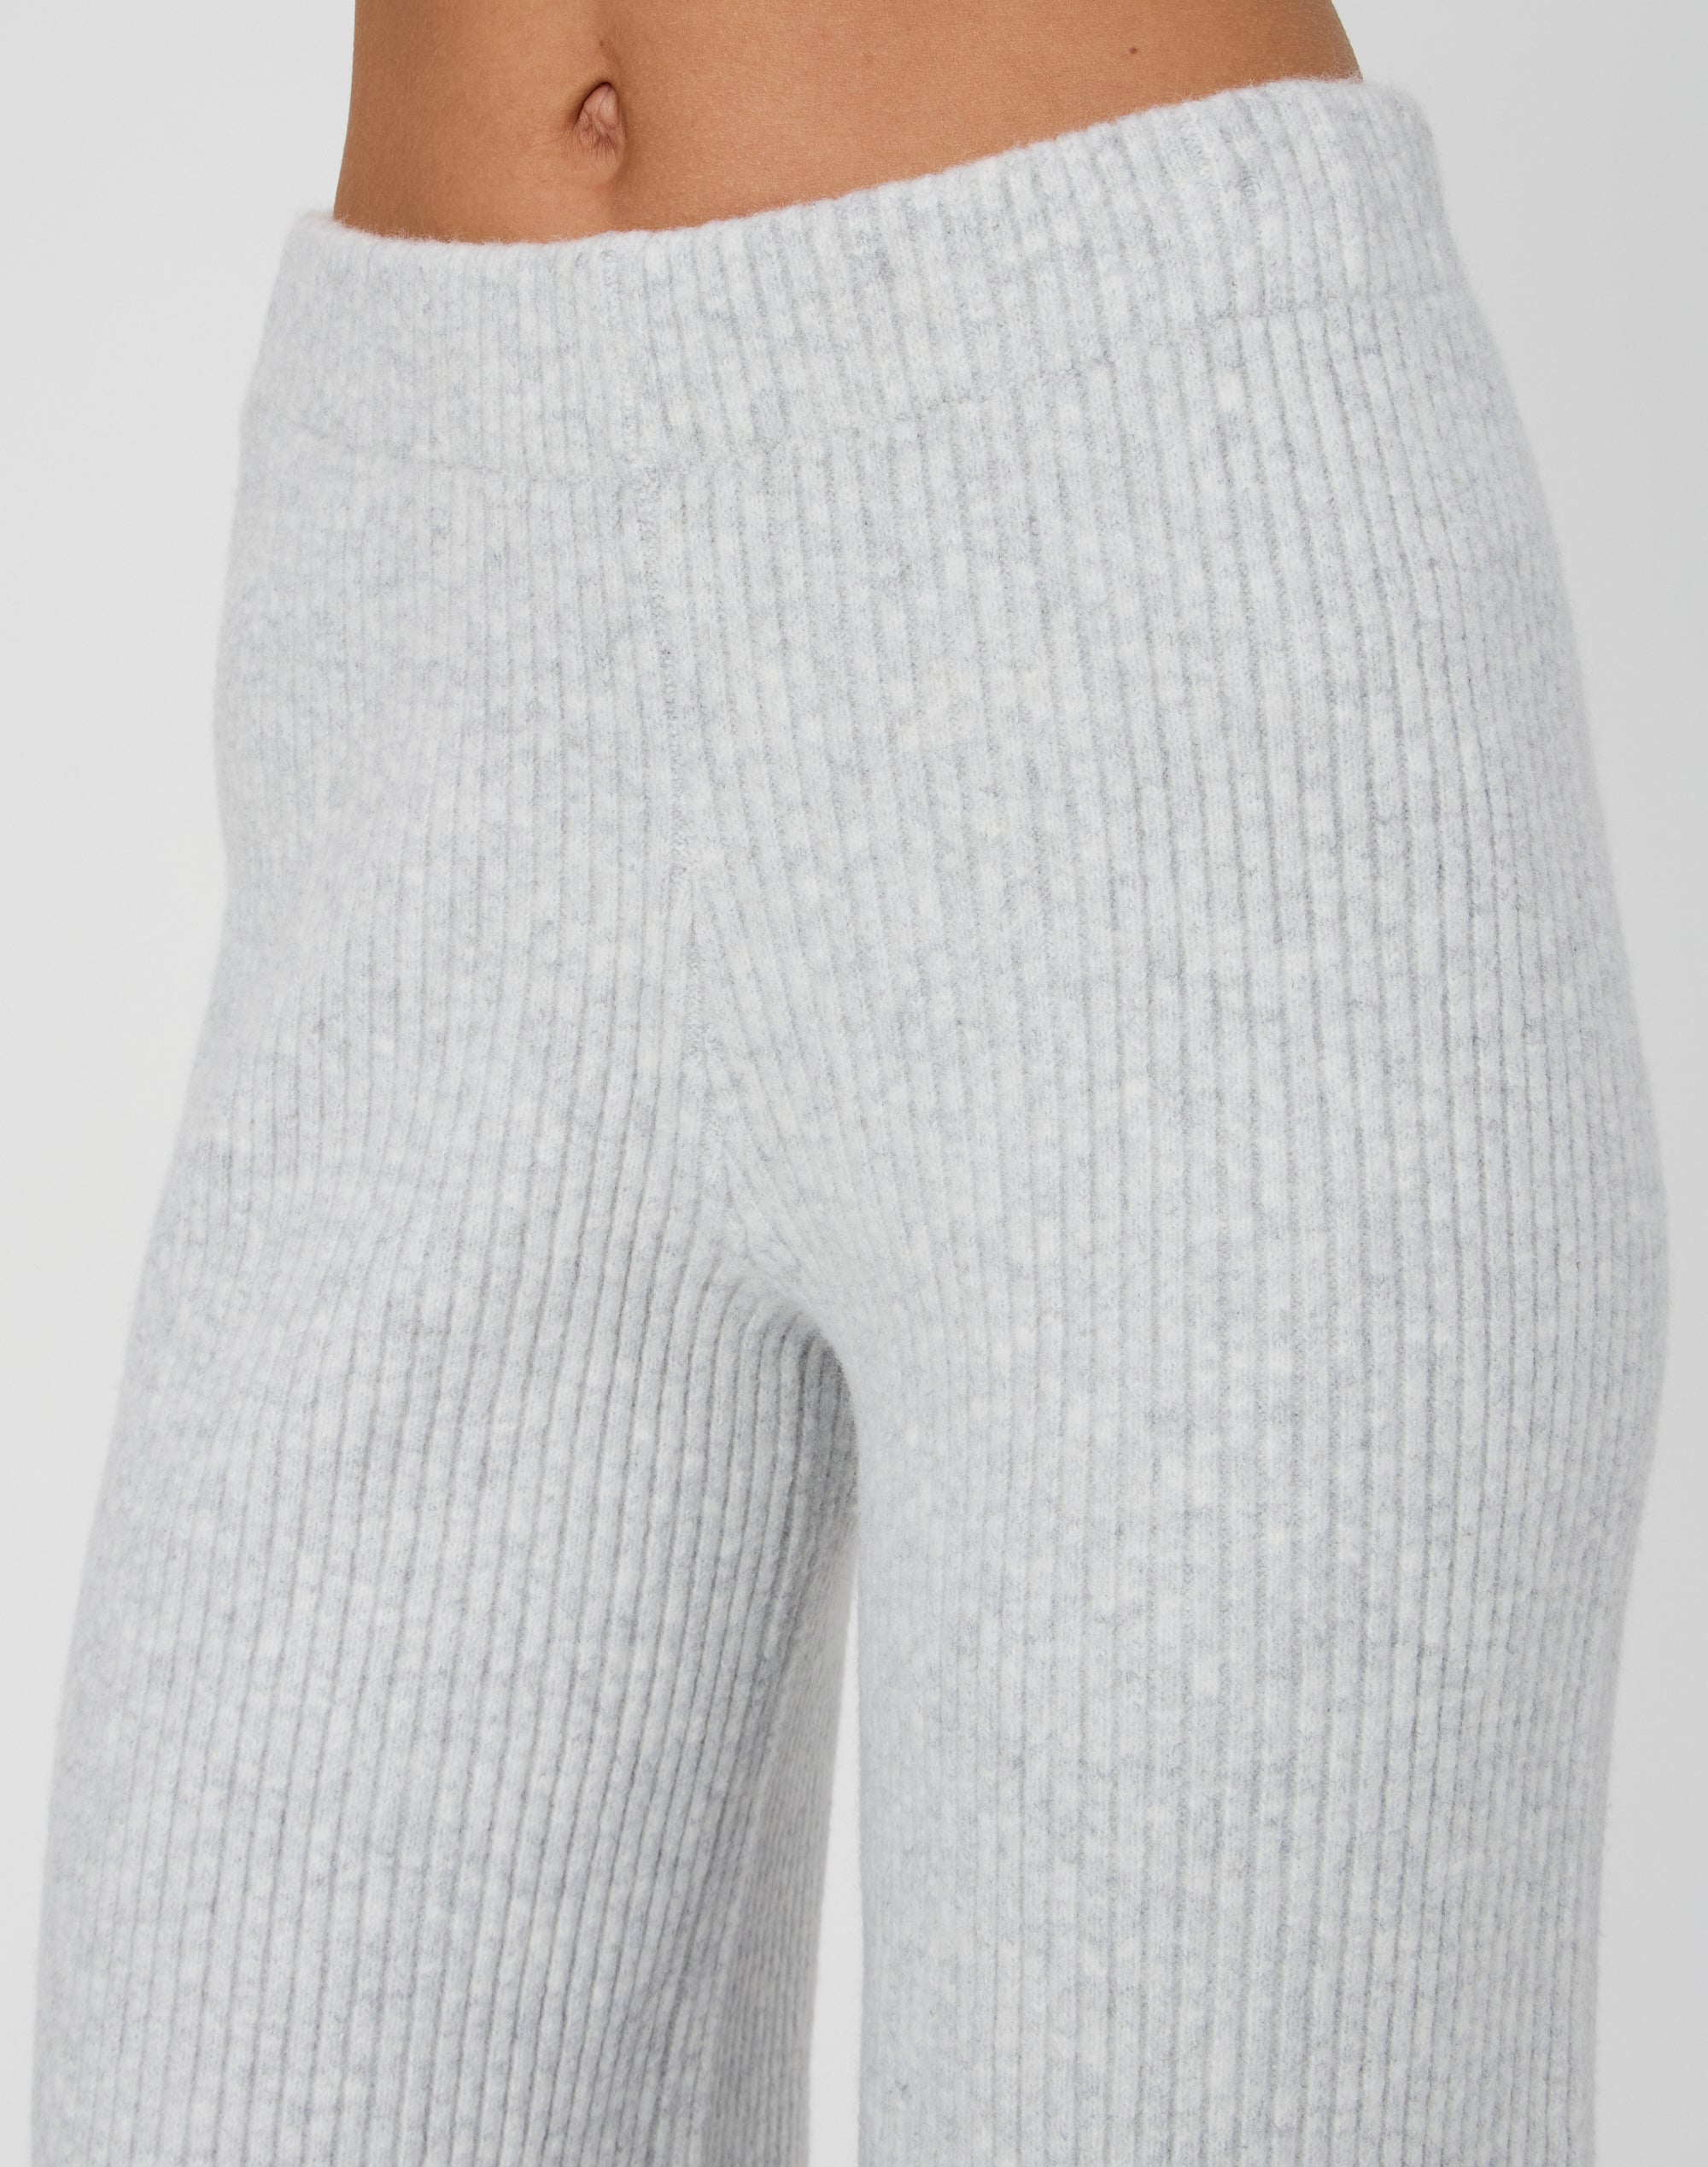 Ribbed Knit Pants in Pale Grey Marle